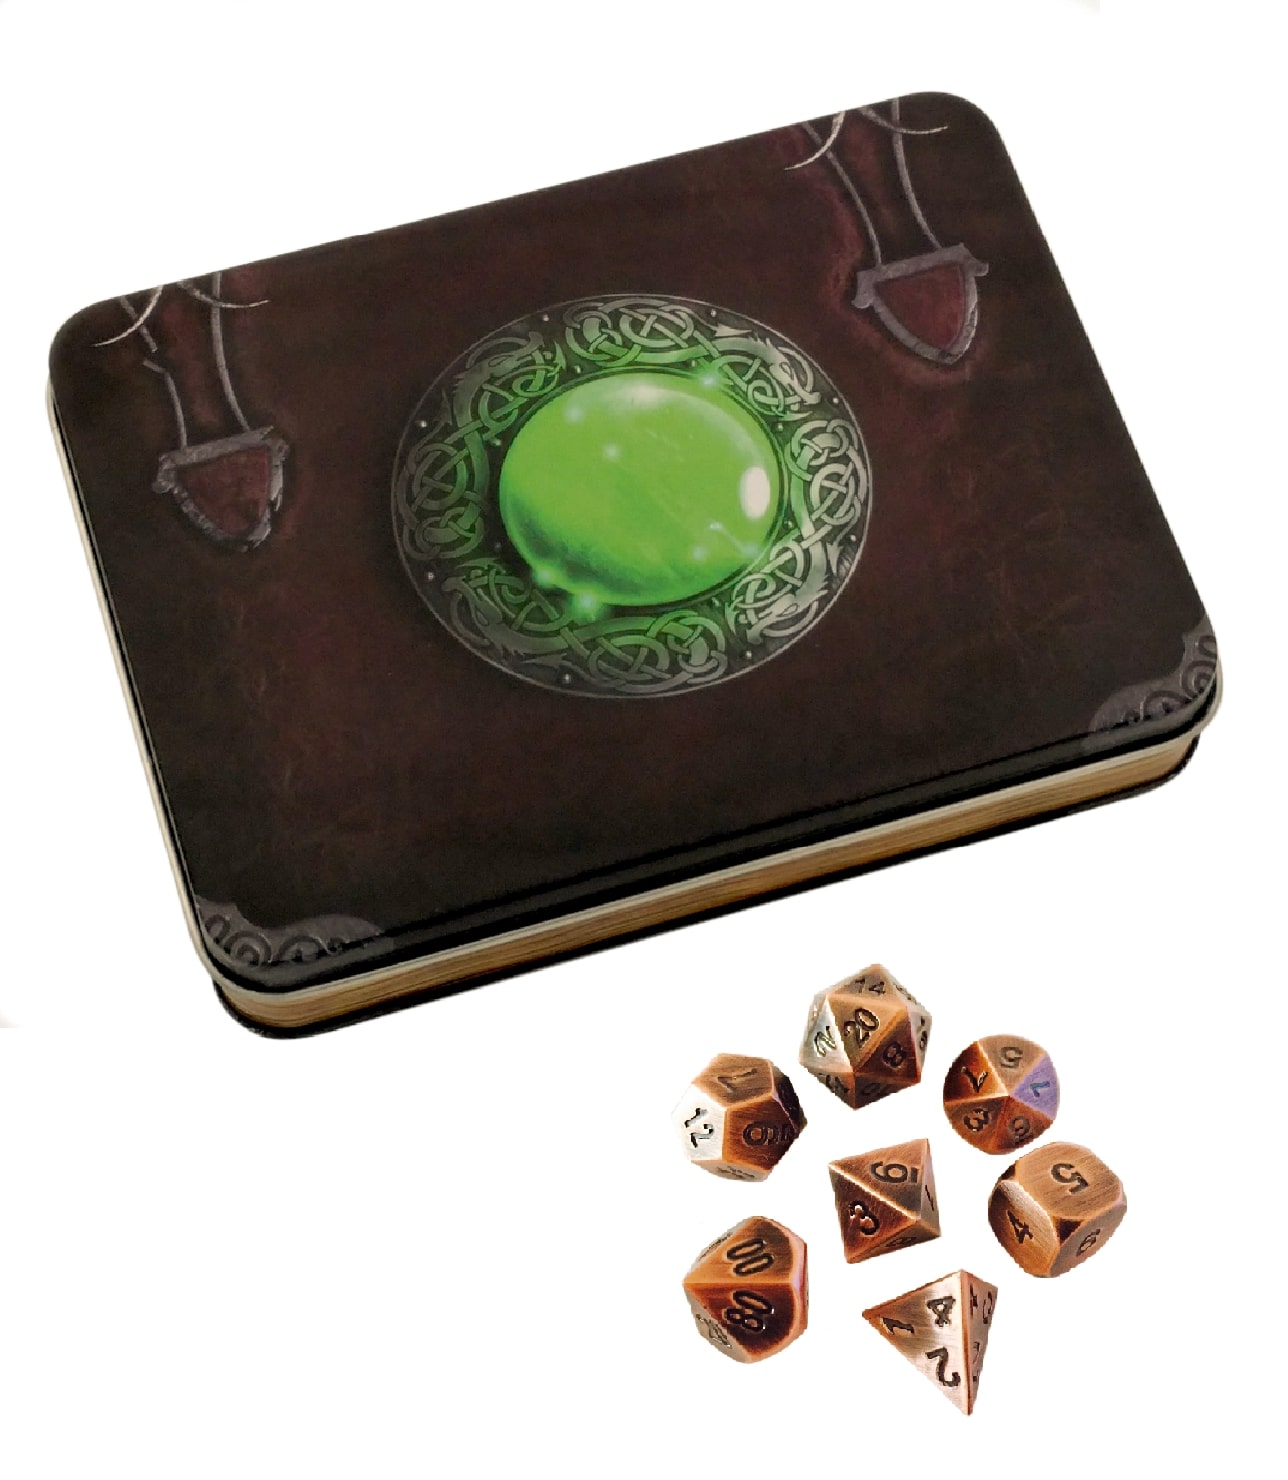 Wizards Grimoire with Metal Dice Sets